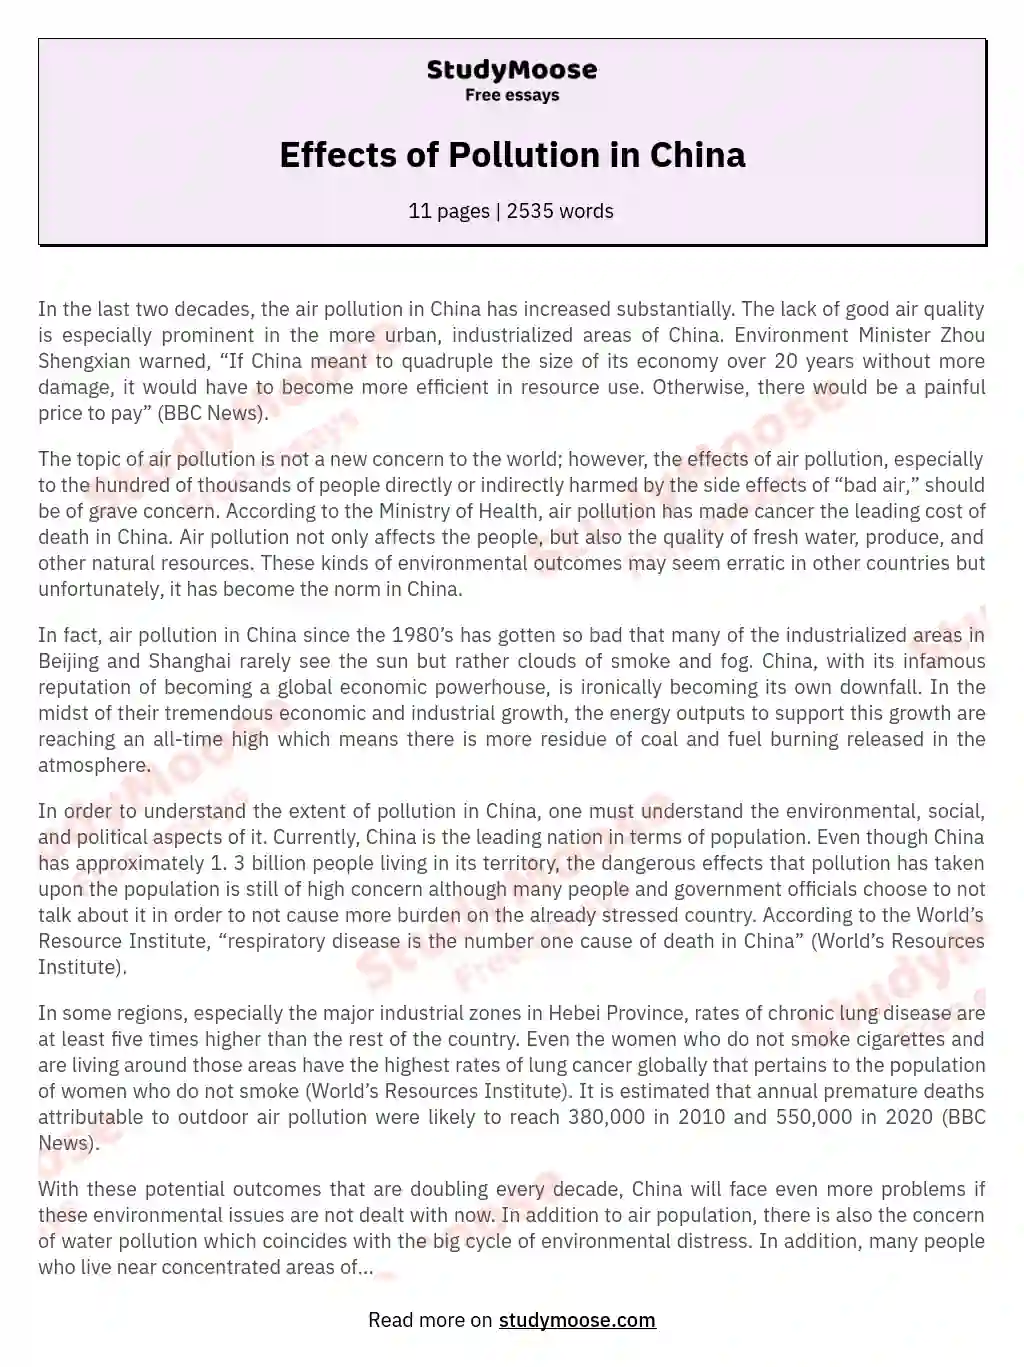 Effects of Pollution in China essay